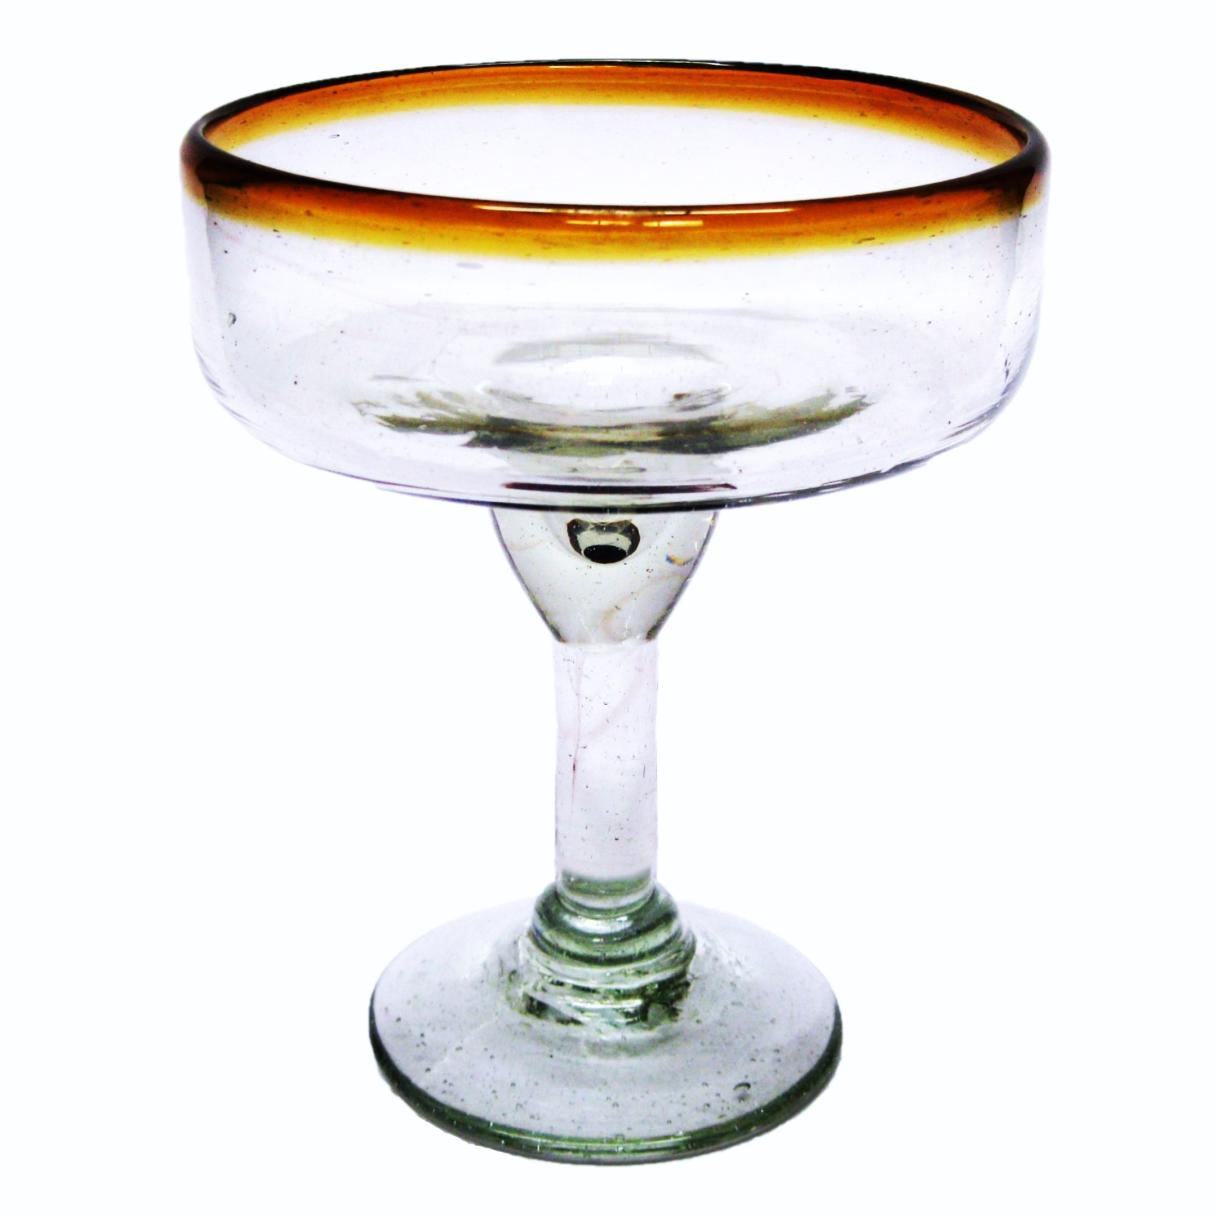 MEXICAN GLASSWARE / Amber Rim 14 oz Large Margarita Glasses (set of 6) / For the margarita lover, these enjoyable large sized margarita glasses feature a cheerful amber color rim.